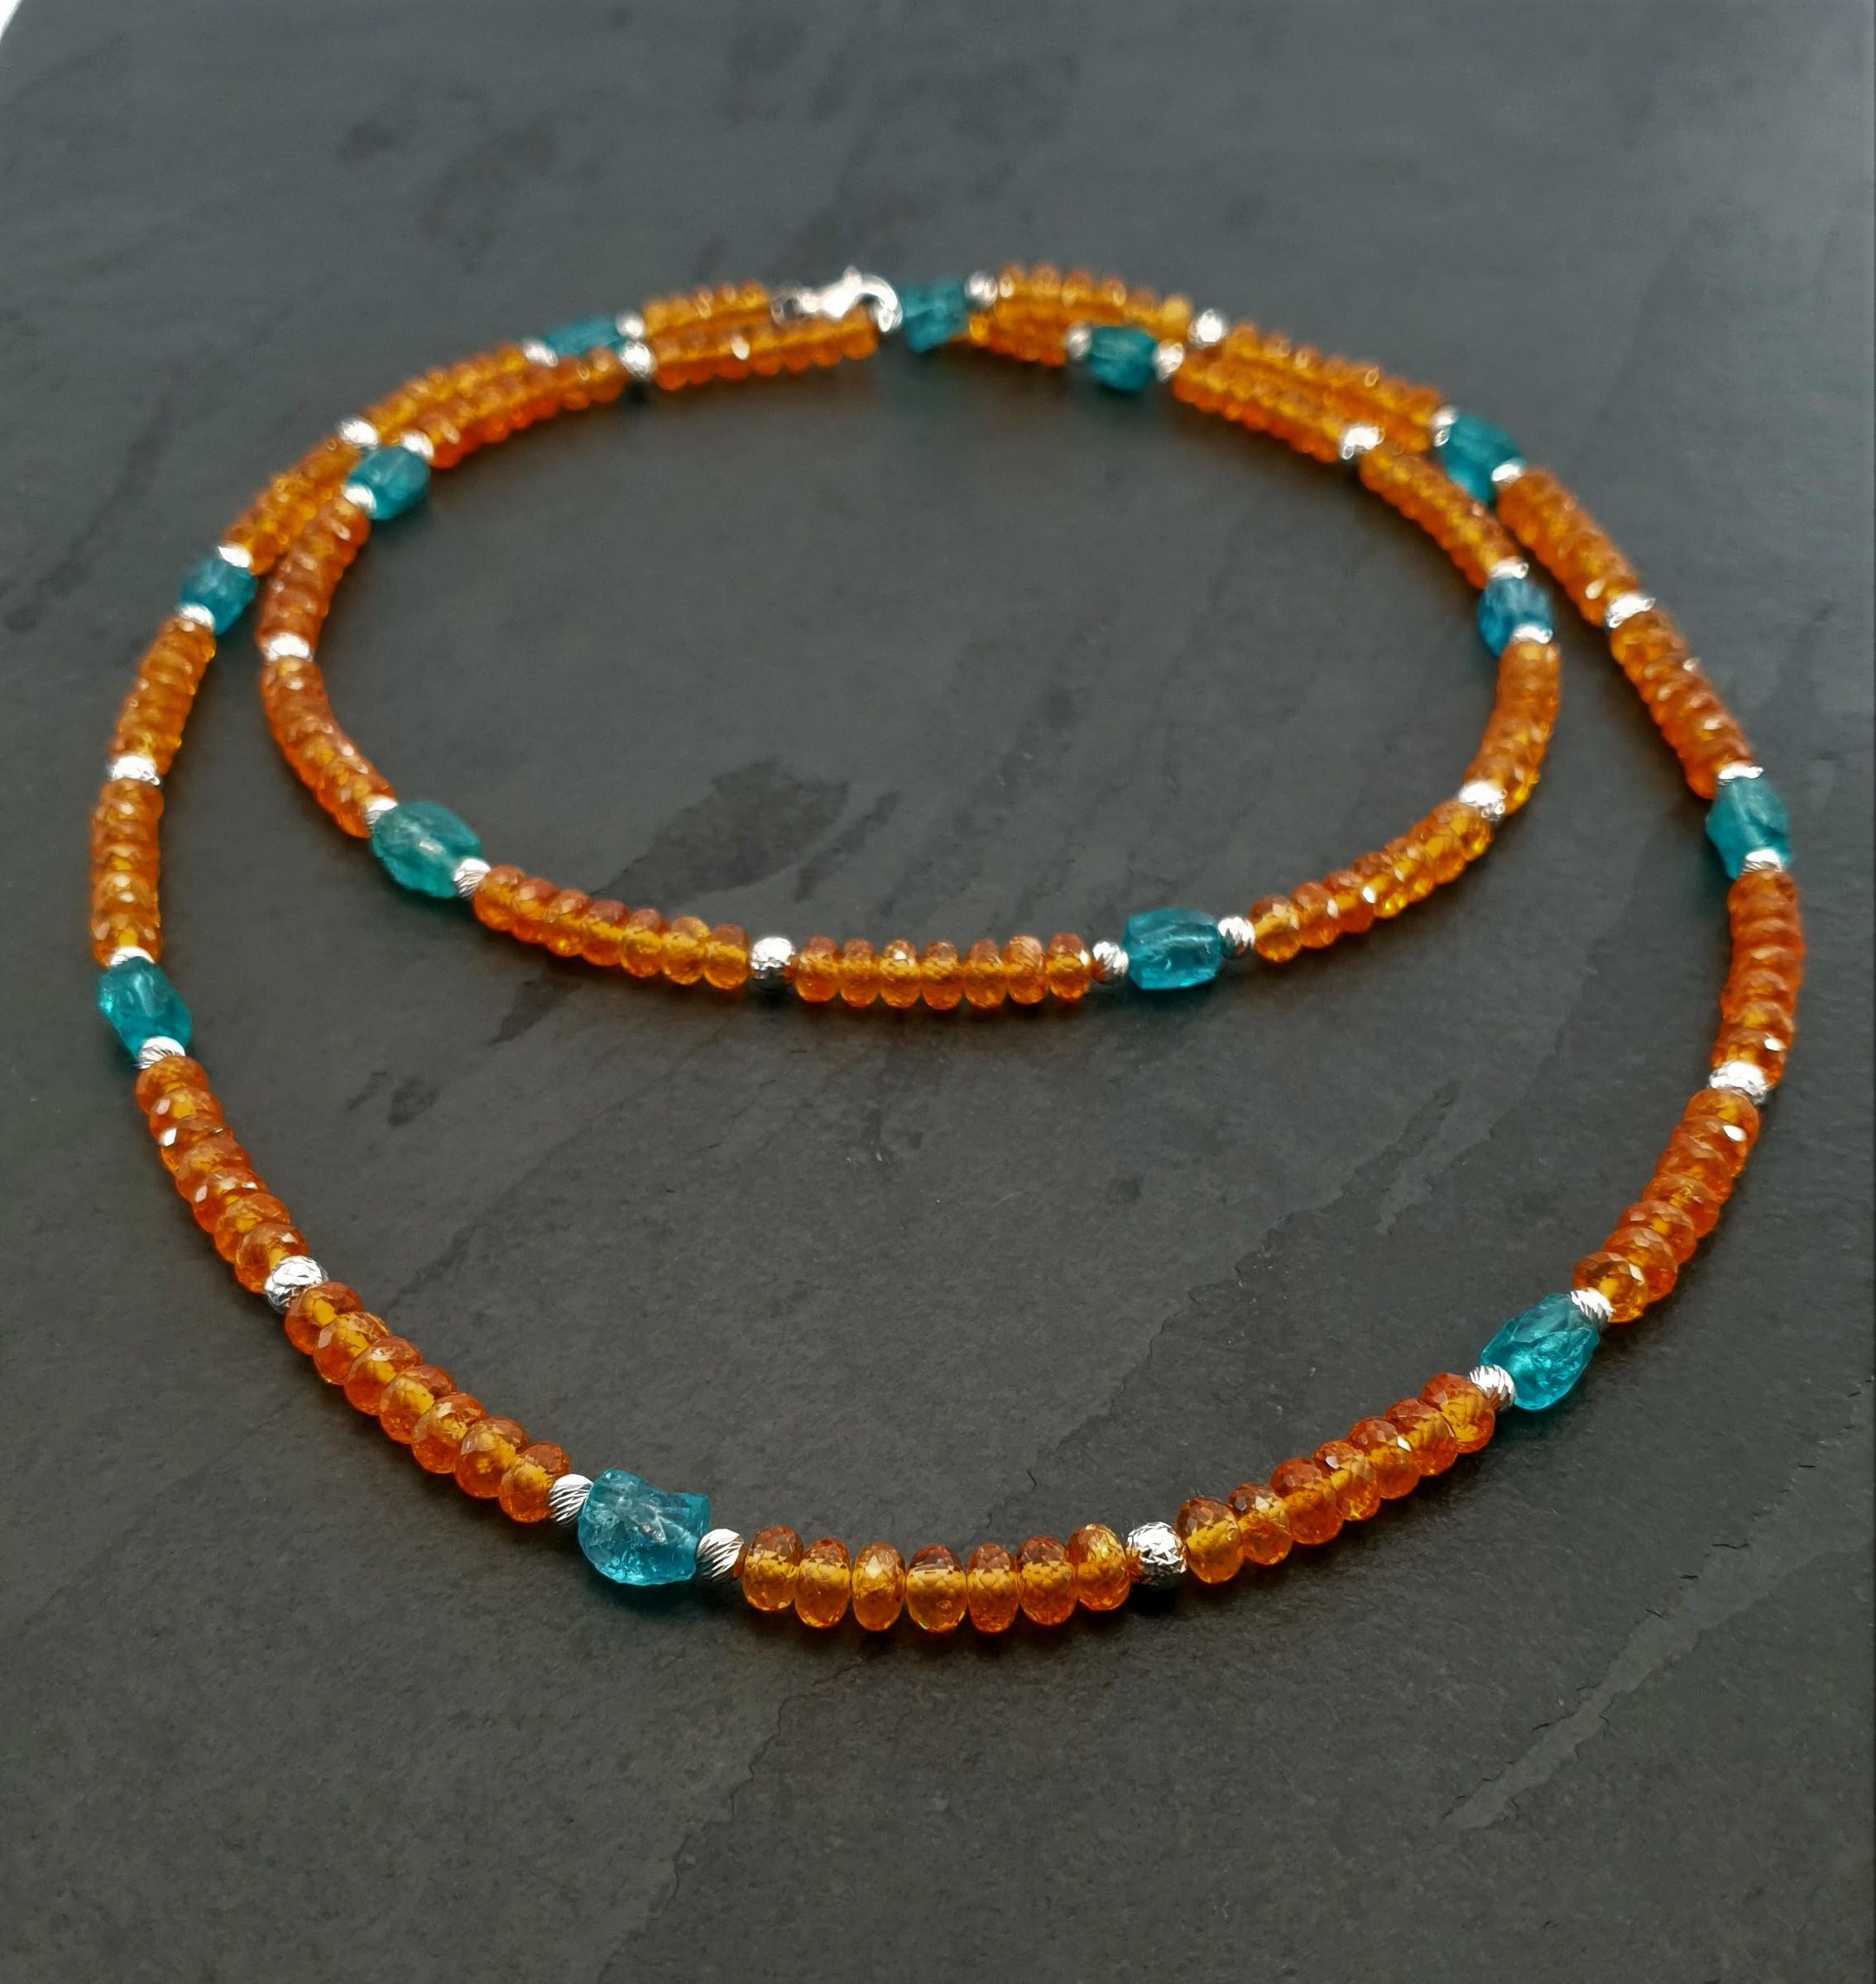 Orange Garnets and Paraiba Color Apatite Beads Necklace with 18 Carat White Gold 3